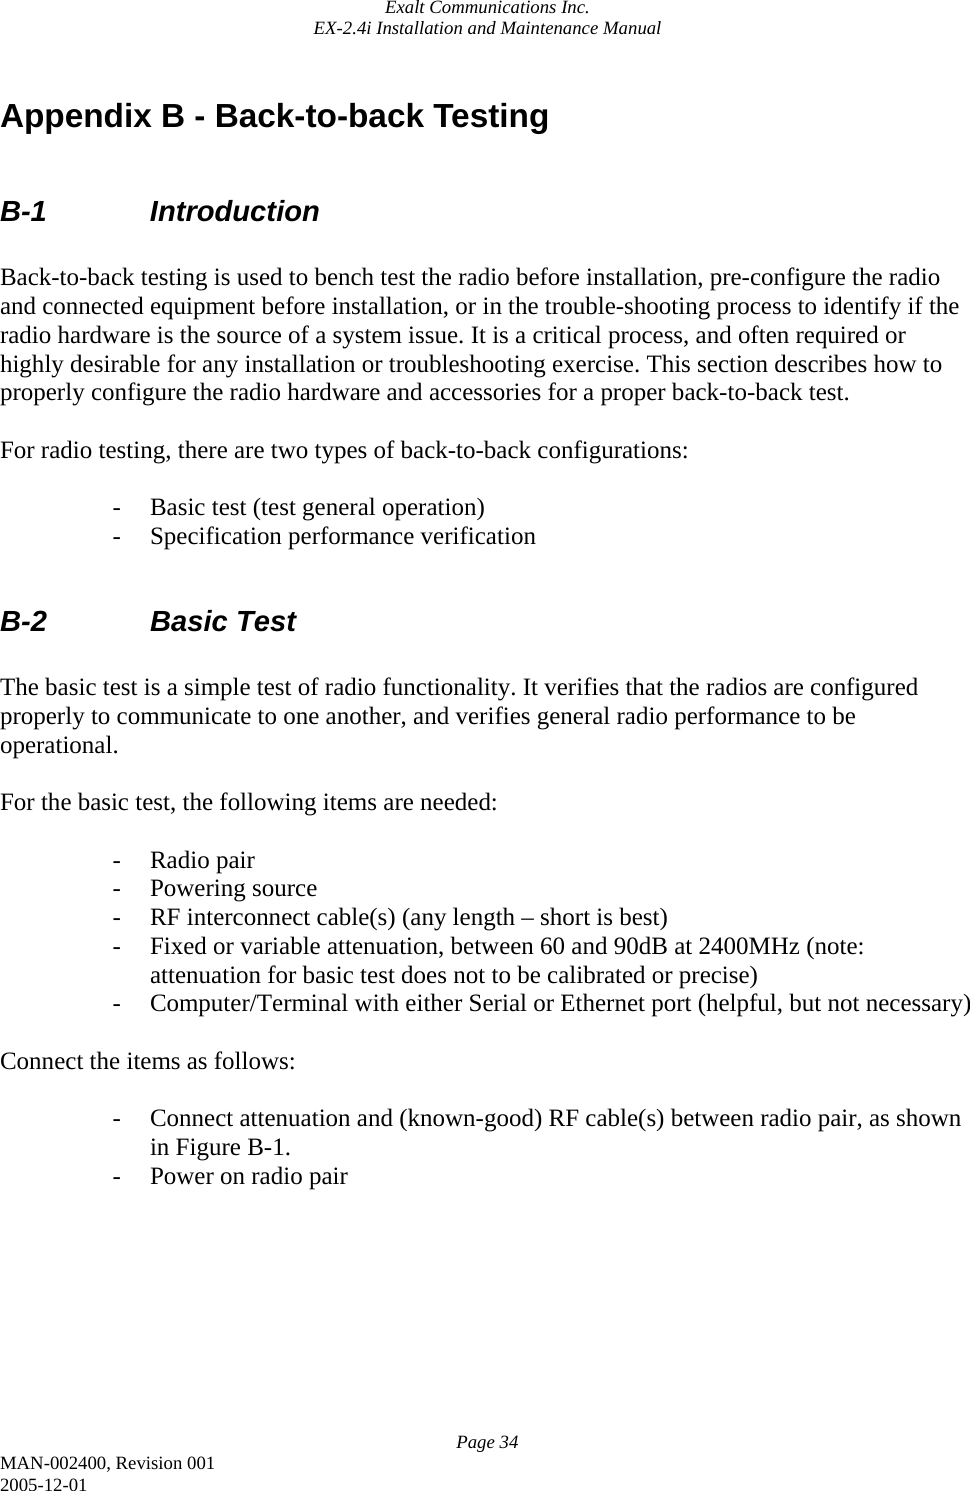 Exalt Communications Inc. EX-2.4i Installation and Maintenance Manual Page 34 MAN-002400, Revision 001 2005-12-01 Appendix B - Back-to-back Testing  B-1   Introduction  Back-to-back testing is used to bench test the radio before installation, pre-configure the radio and connected equipment before installation, or in the trouble-shooting process to identify if the radio hardware is the source of a system issue. It is a critical process, and often required or highly desirable for any installation or troubleshooting exercise. This section describes how to properly configure the radio hardware and accessories for a proper back-to-back test.  For radio testing, there are two types of back-to-back configurations:  - Basic test (test general operation) - Specification performance verification  B-2   Basic Test  The basic test is a simple test of radio functionality. It verifies that the radios are configured properly to communicate to one another, and verifies general radio performance to be operational.  For the basic test, the following items are needed:  - Radio pair - Powering source - RF interconnect cable(s) (any length – short is best) - Fixed or variable attenuation, between 60 and 90dB at 2400MHz (note: attenuation for basic test does not to be calibrated or precise) - Computer/Terminal with either Serial or Ethernet port (helpful, but not necessary)  Connect the items as follows:  - Connect attenuation and (known-good) RF cable(s) between radio pair, as shown in Figure B-1. - Power on radio pair         